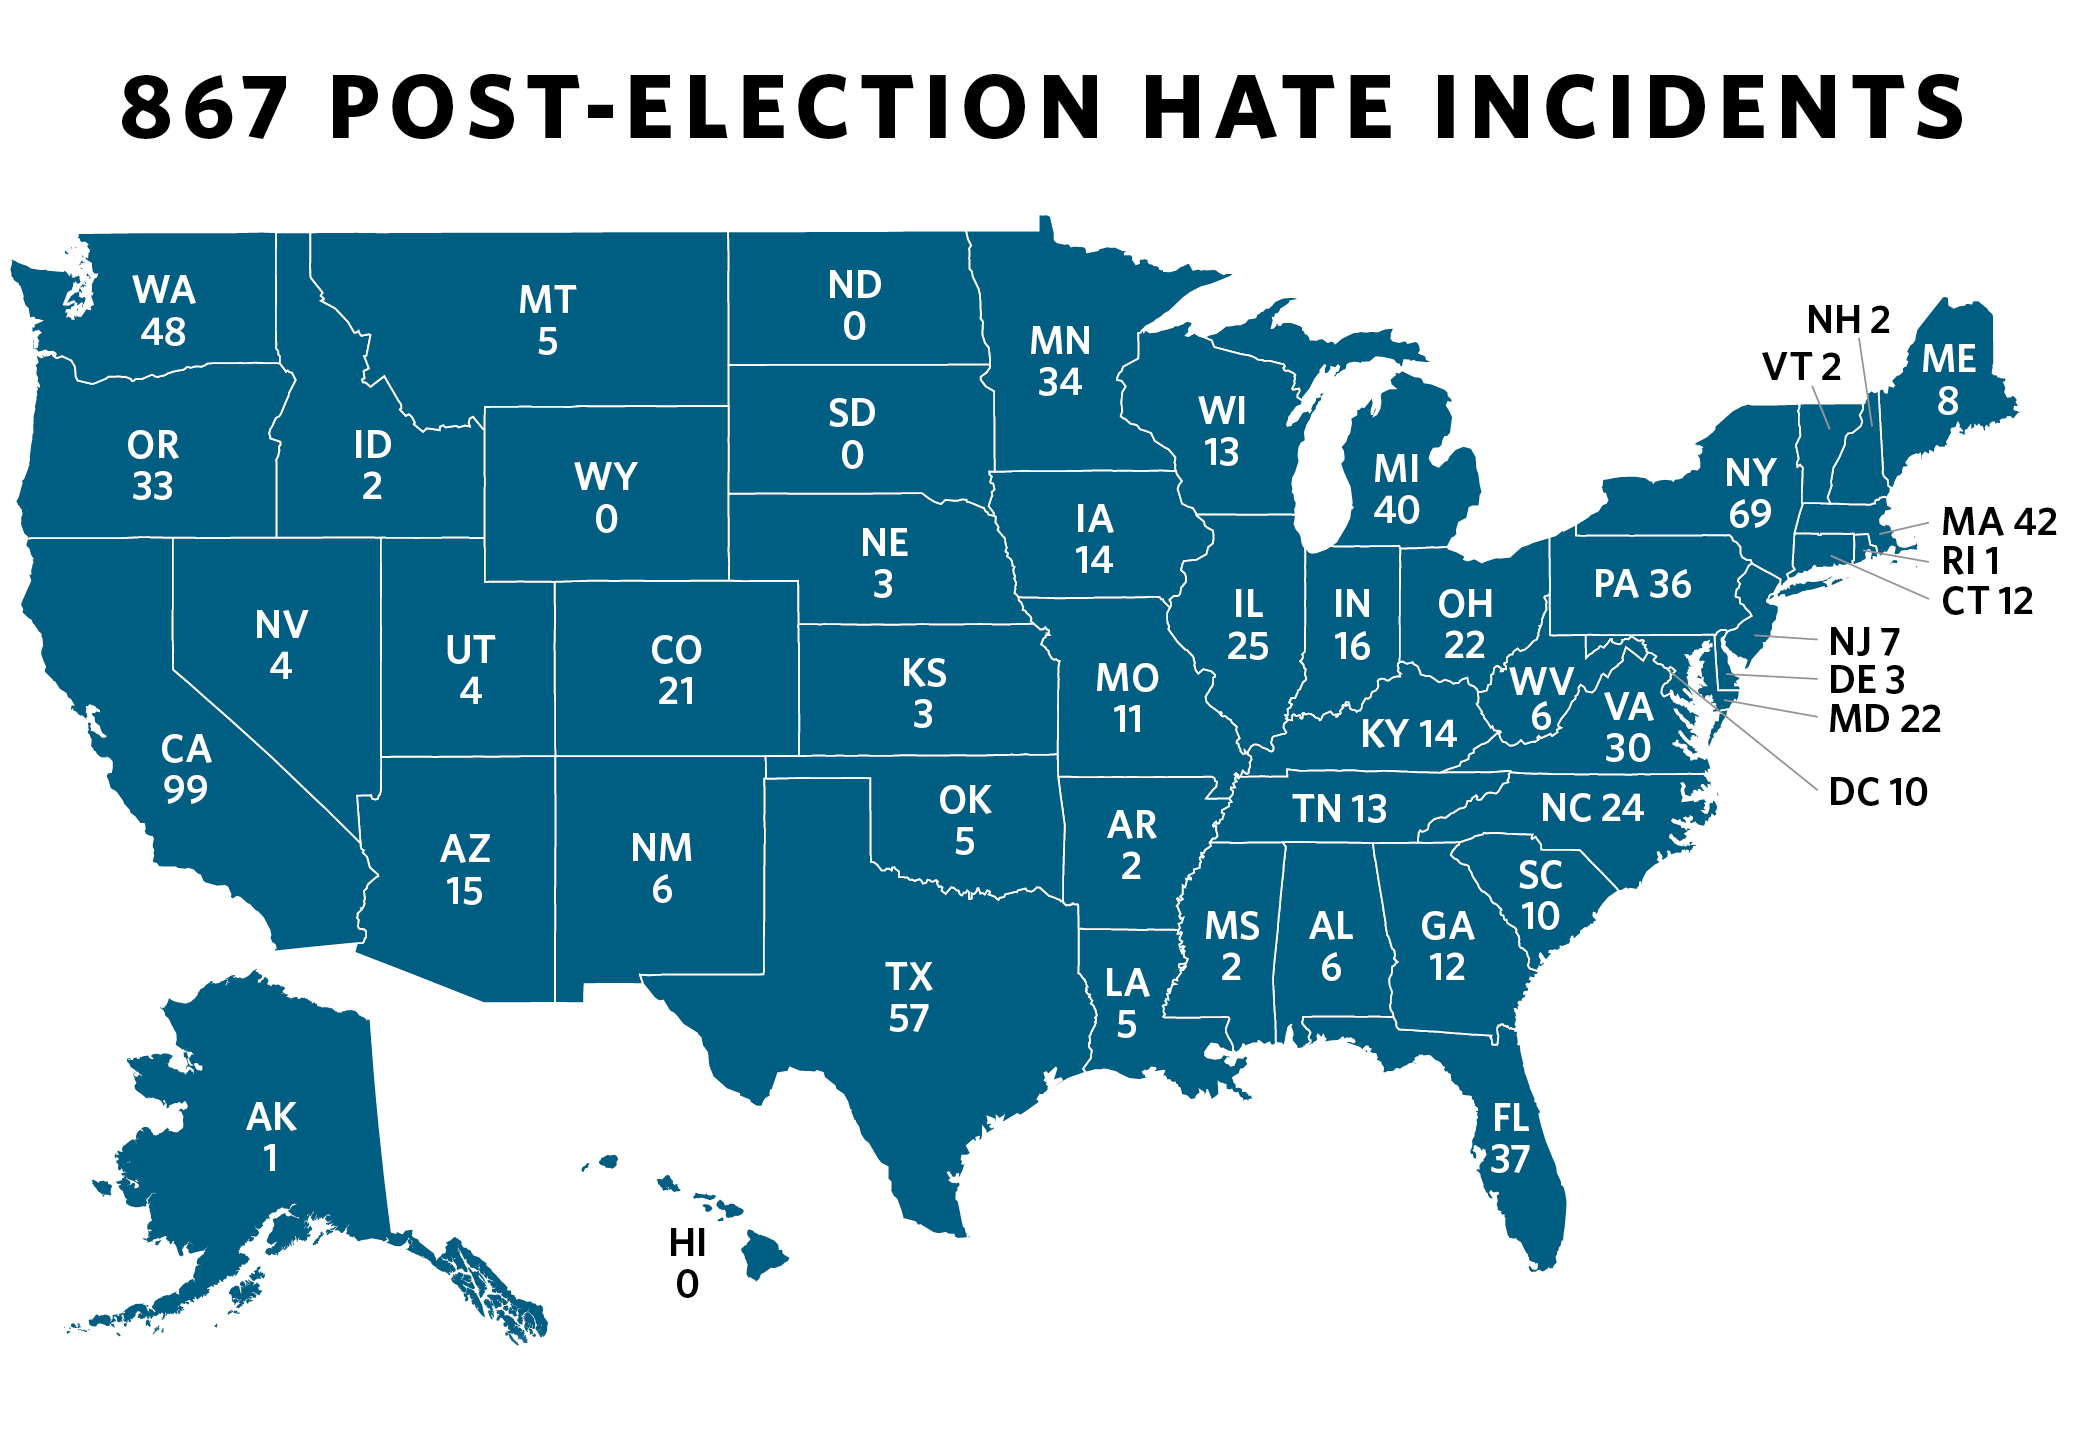 com_hate-incidents-report_hate-count-map